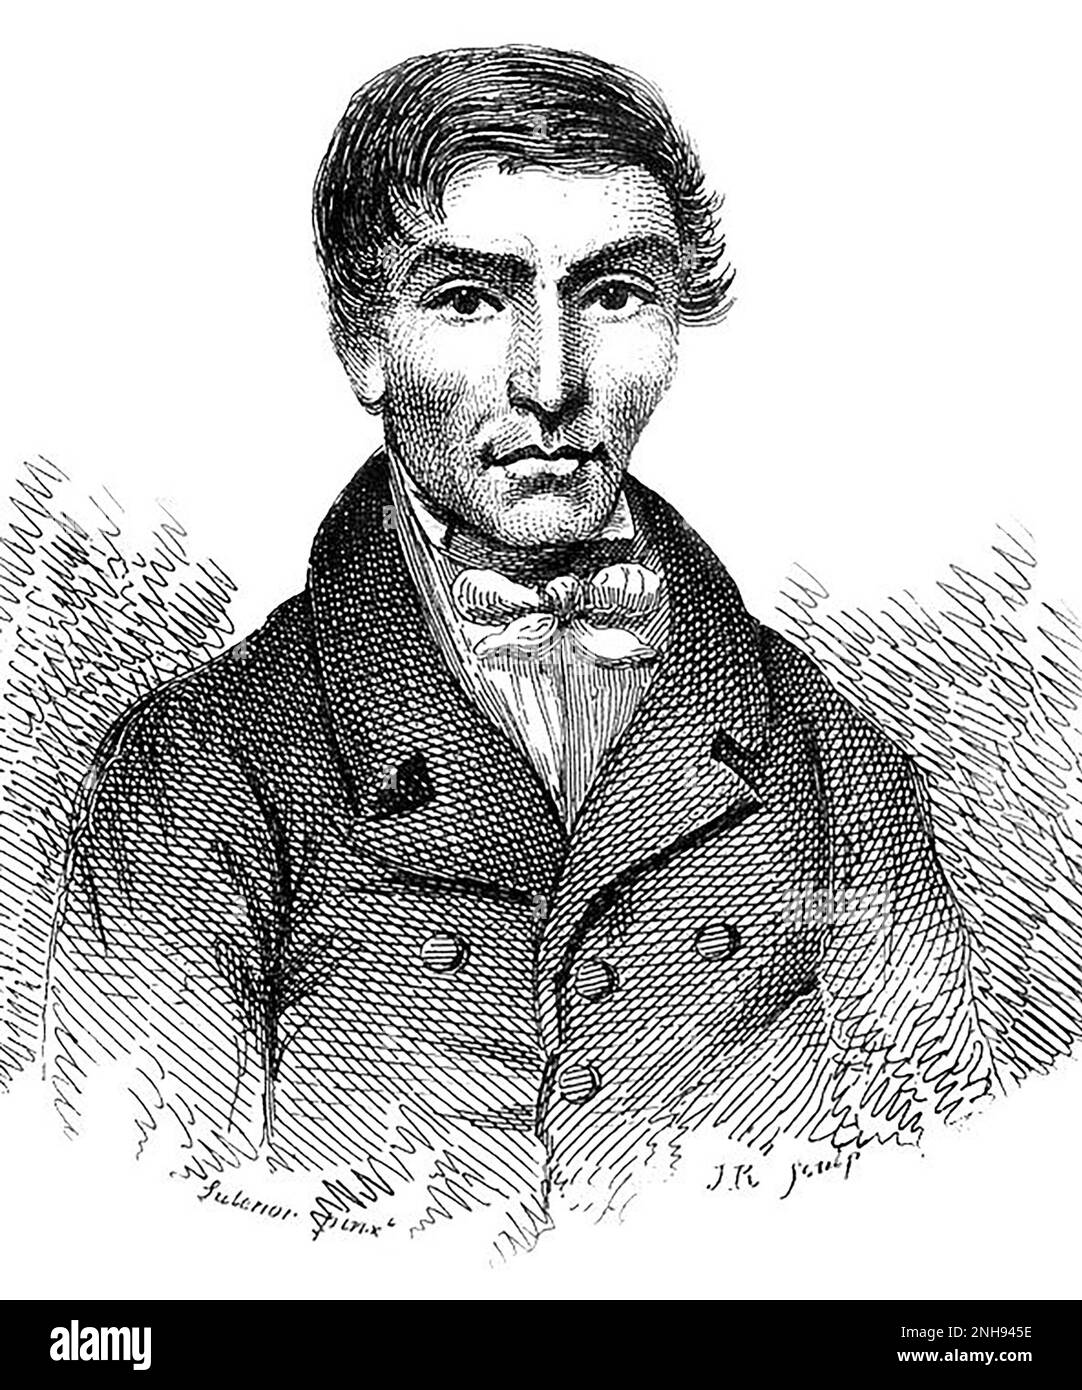 William Hare, 1829. The Burke and Hare murders were a series of sixteen killings committed over ten months in 1828 in Edinburgh, Scotland, by Irish immigrants William Burke (1792-1829) and William Hare (1792-?), who sold the corpses to Robert Knox (1791-1862) for dissection at his anatomy lectures. Hare avoided conviction by giving evidence against William Burke, who was hanged and publicly dissected in 1829. The murders and trade in illegal corpses so reviled the public that the Anatomy Act was passed in 1832, giving license to medical practitioners to dissect donated bodies. Stock Photo